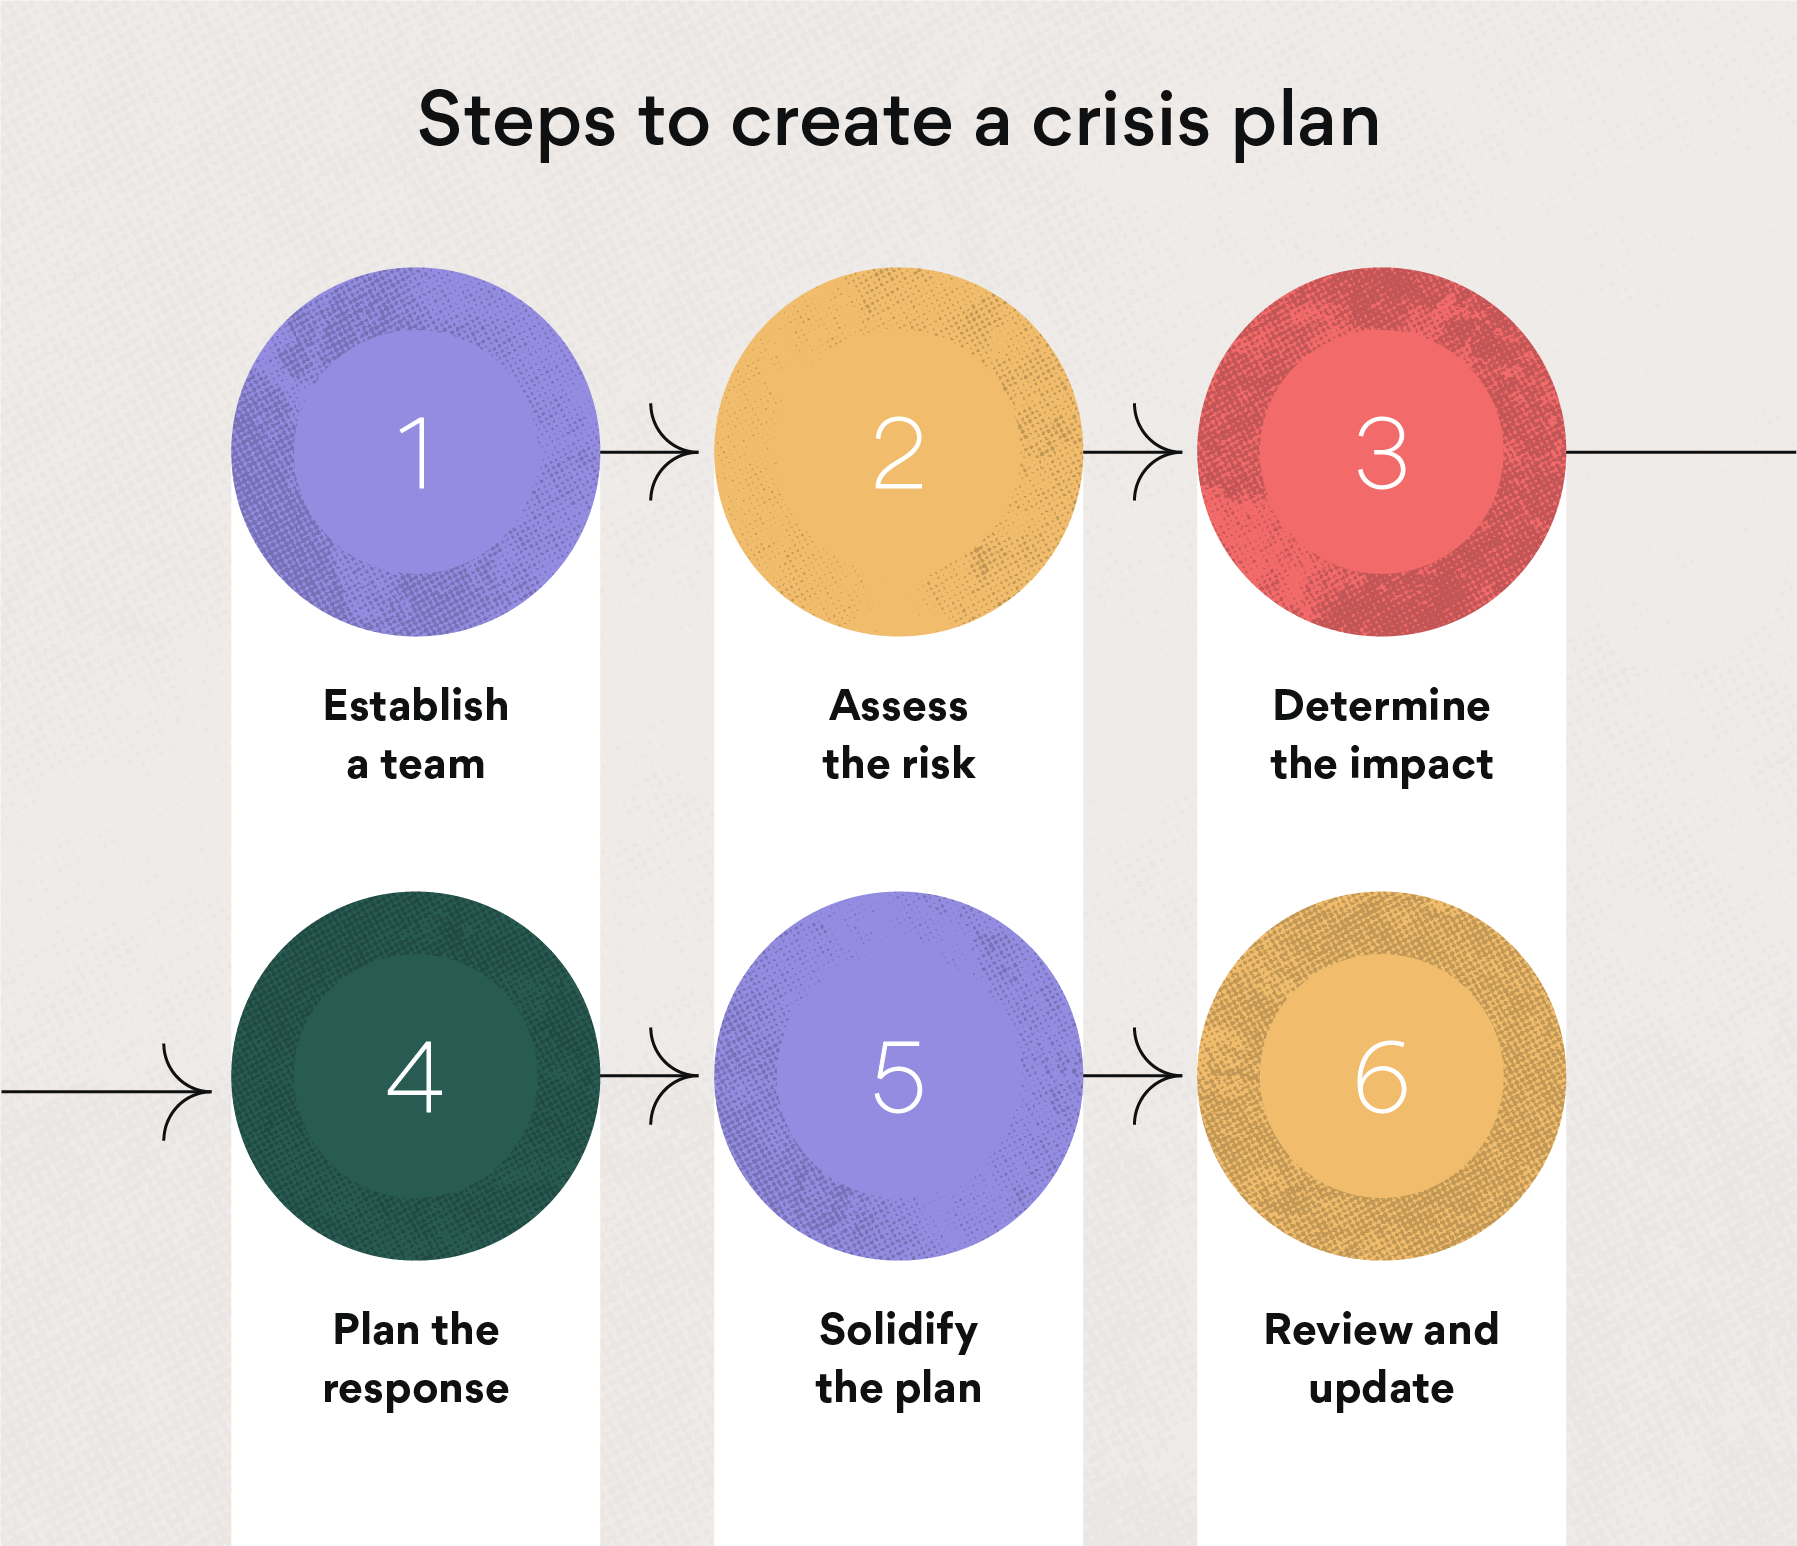 6 steps to create a crisis plan